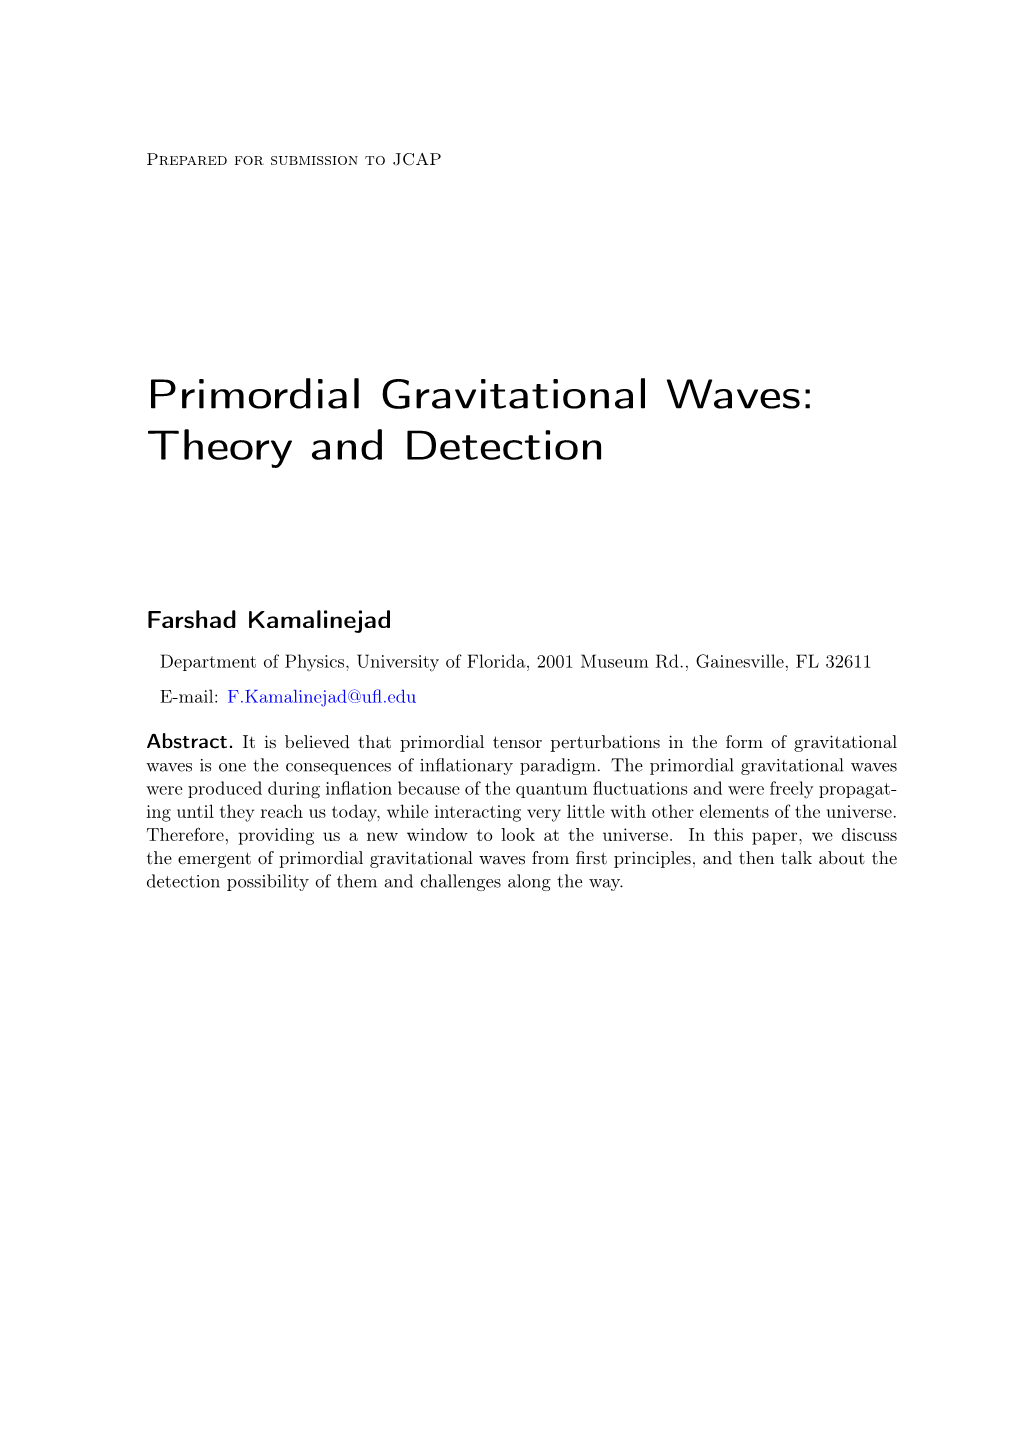 Primordial Gravitational Waves: Theory and Detection